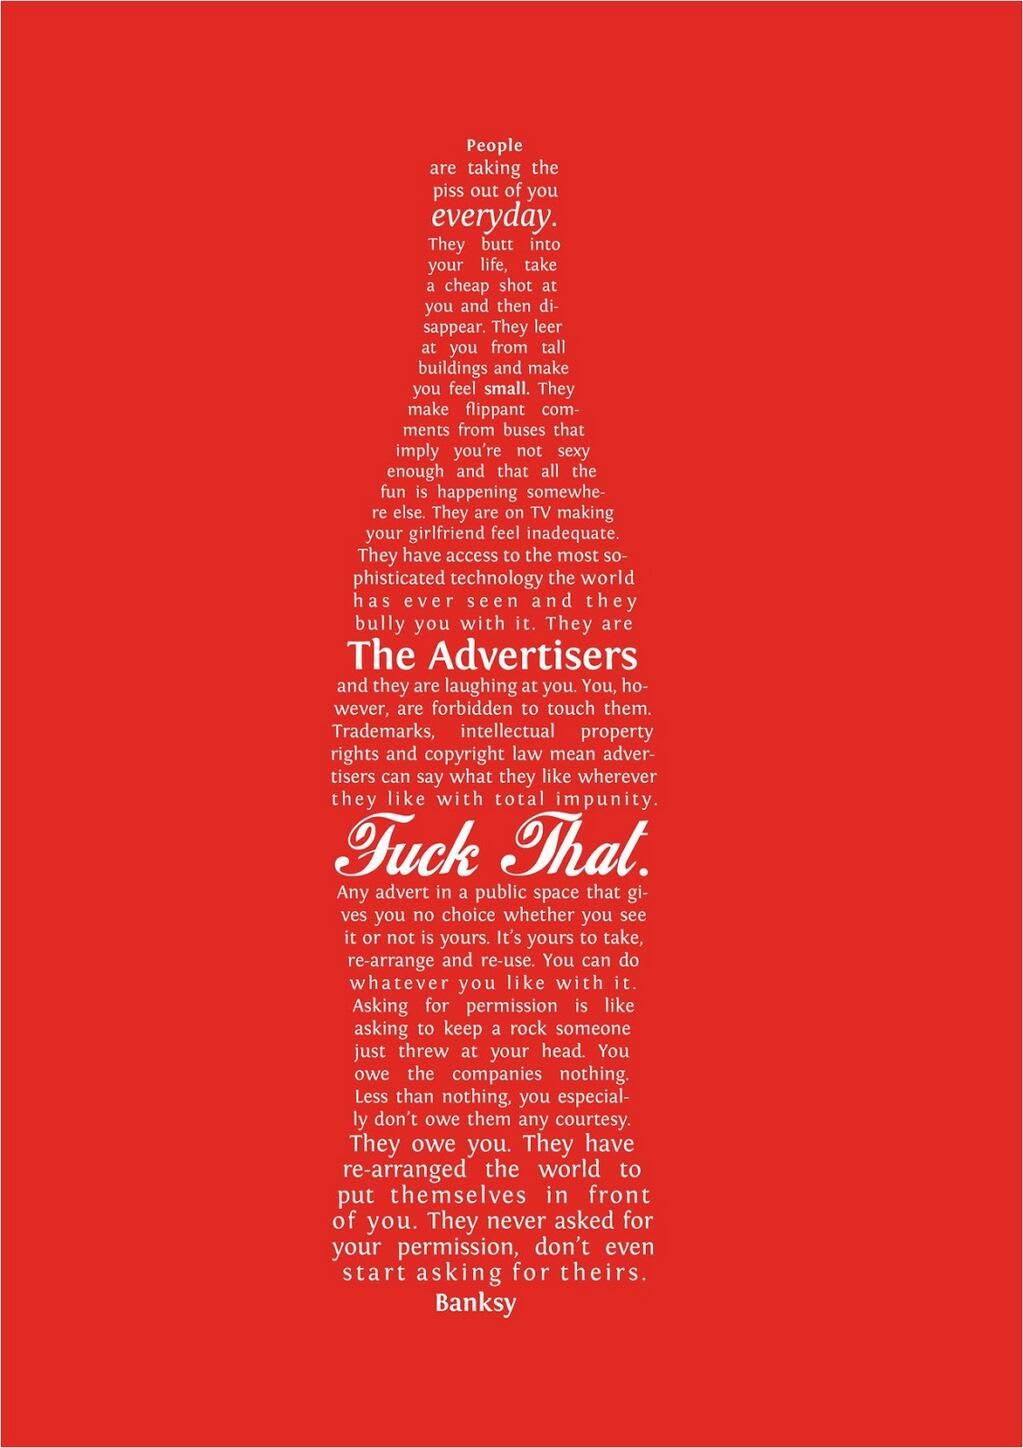 Banksy about advertising | Coke ad, Banksy, Banksy quotes